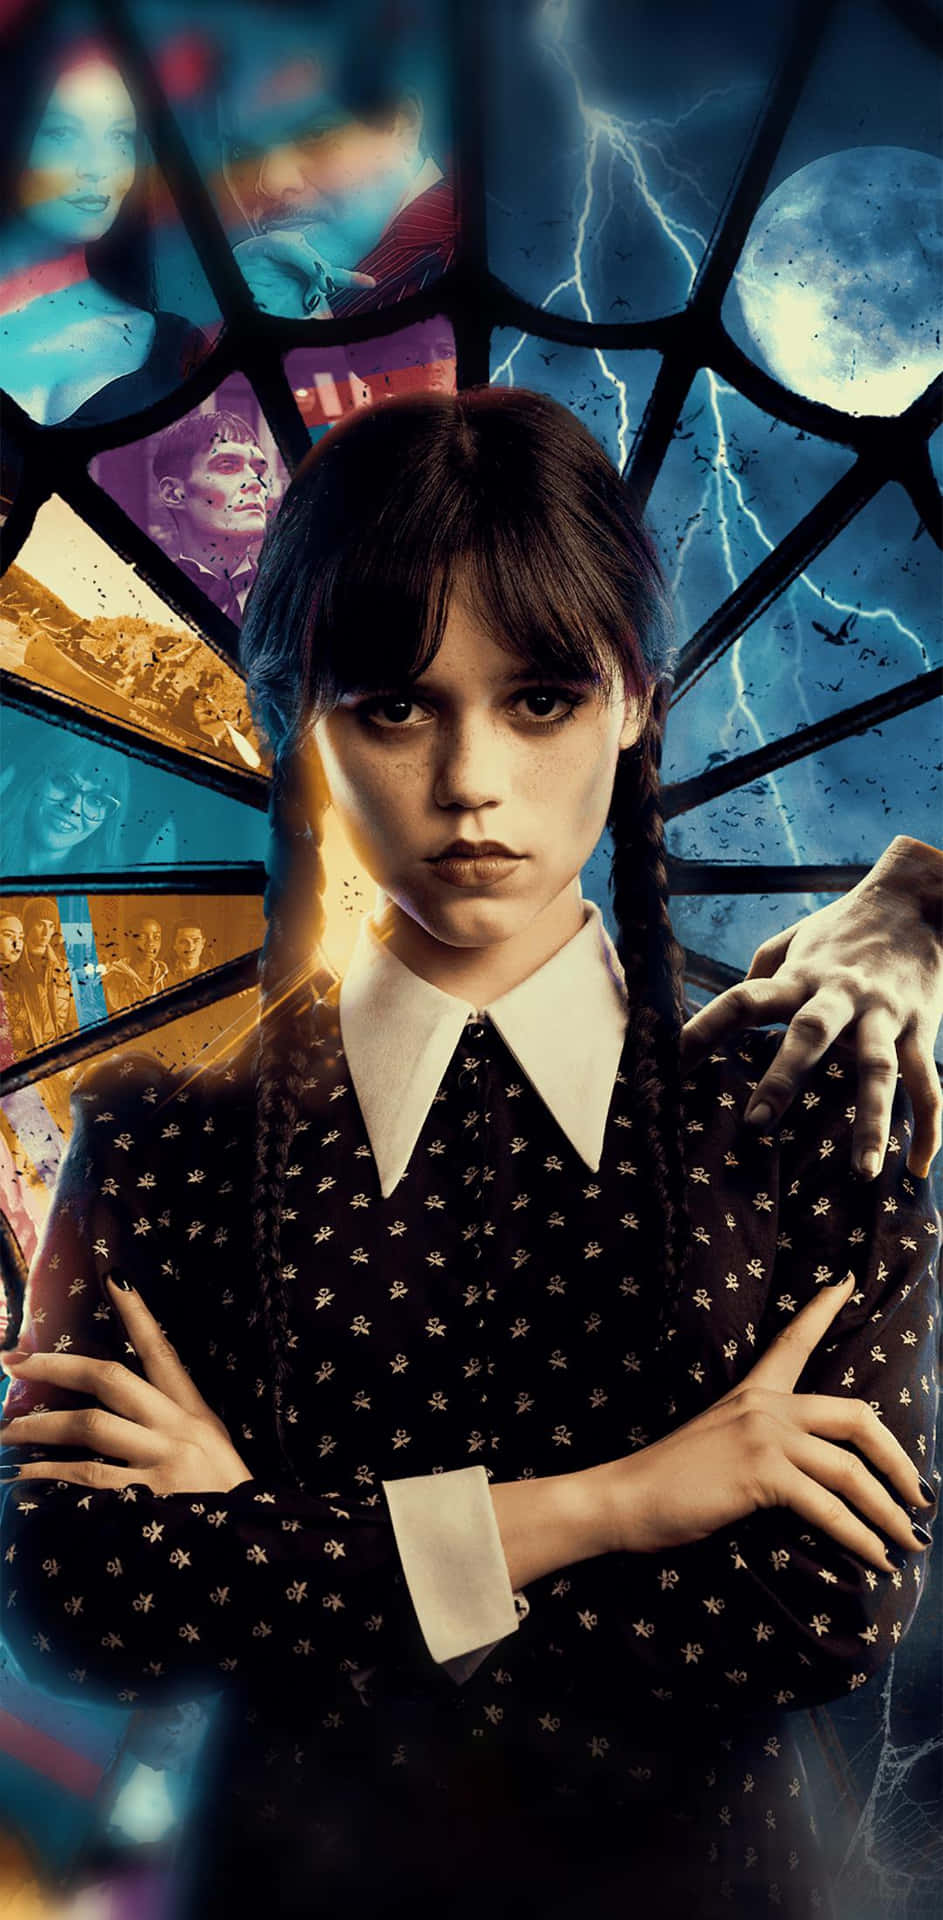 Wednesday Addams Stained Glass Backdrop Wallpaper